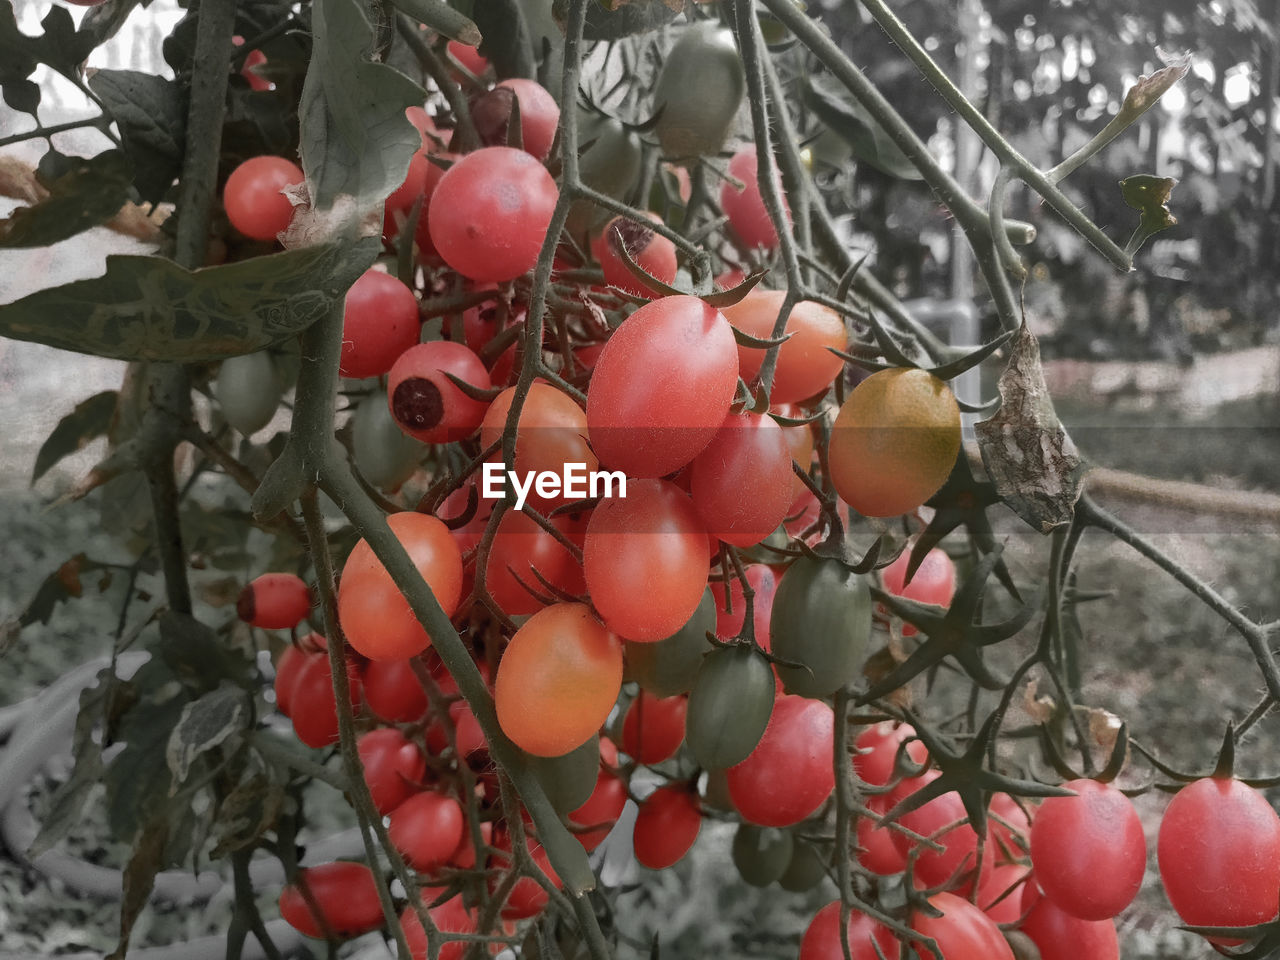 CLOSE-UP OF RED BERRIES GROWING ON TREE